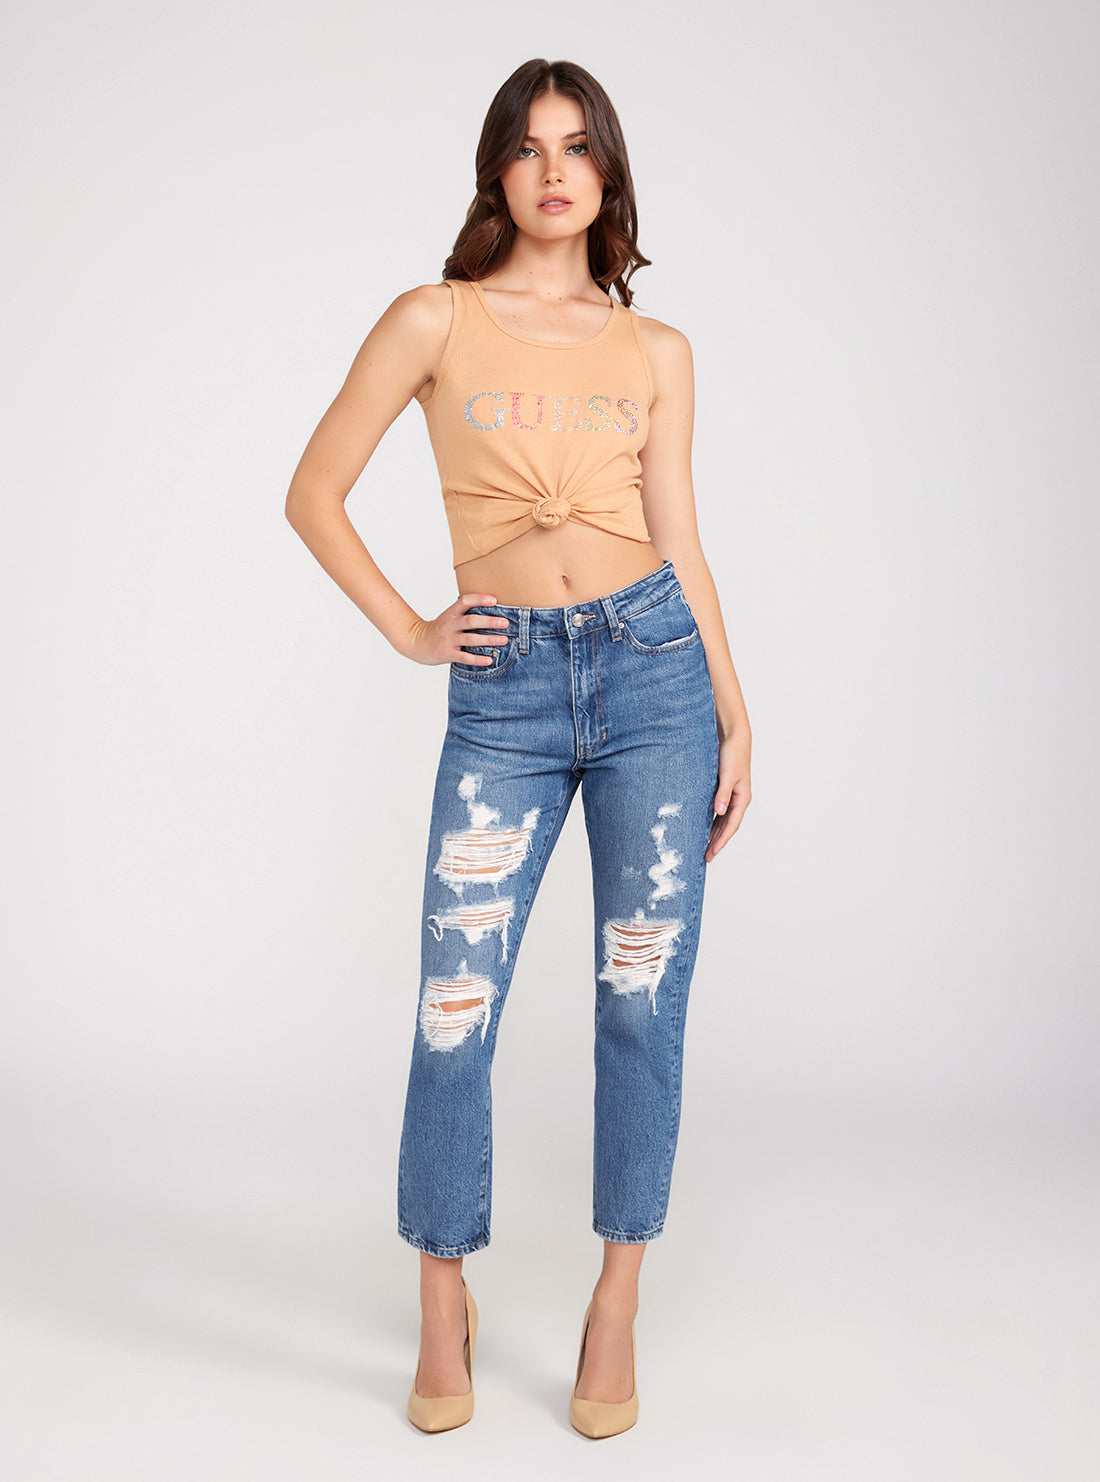 GUESS Mid-Rise Ripped Cropped It Girl Jeans In Medium Wash full view